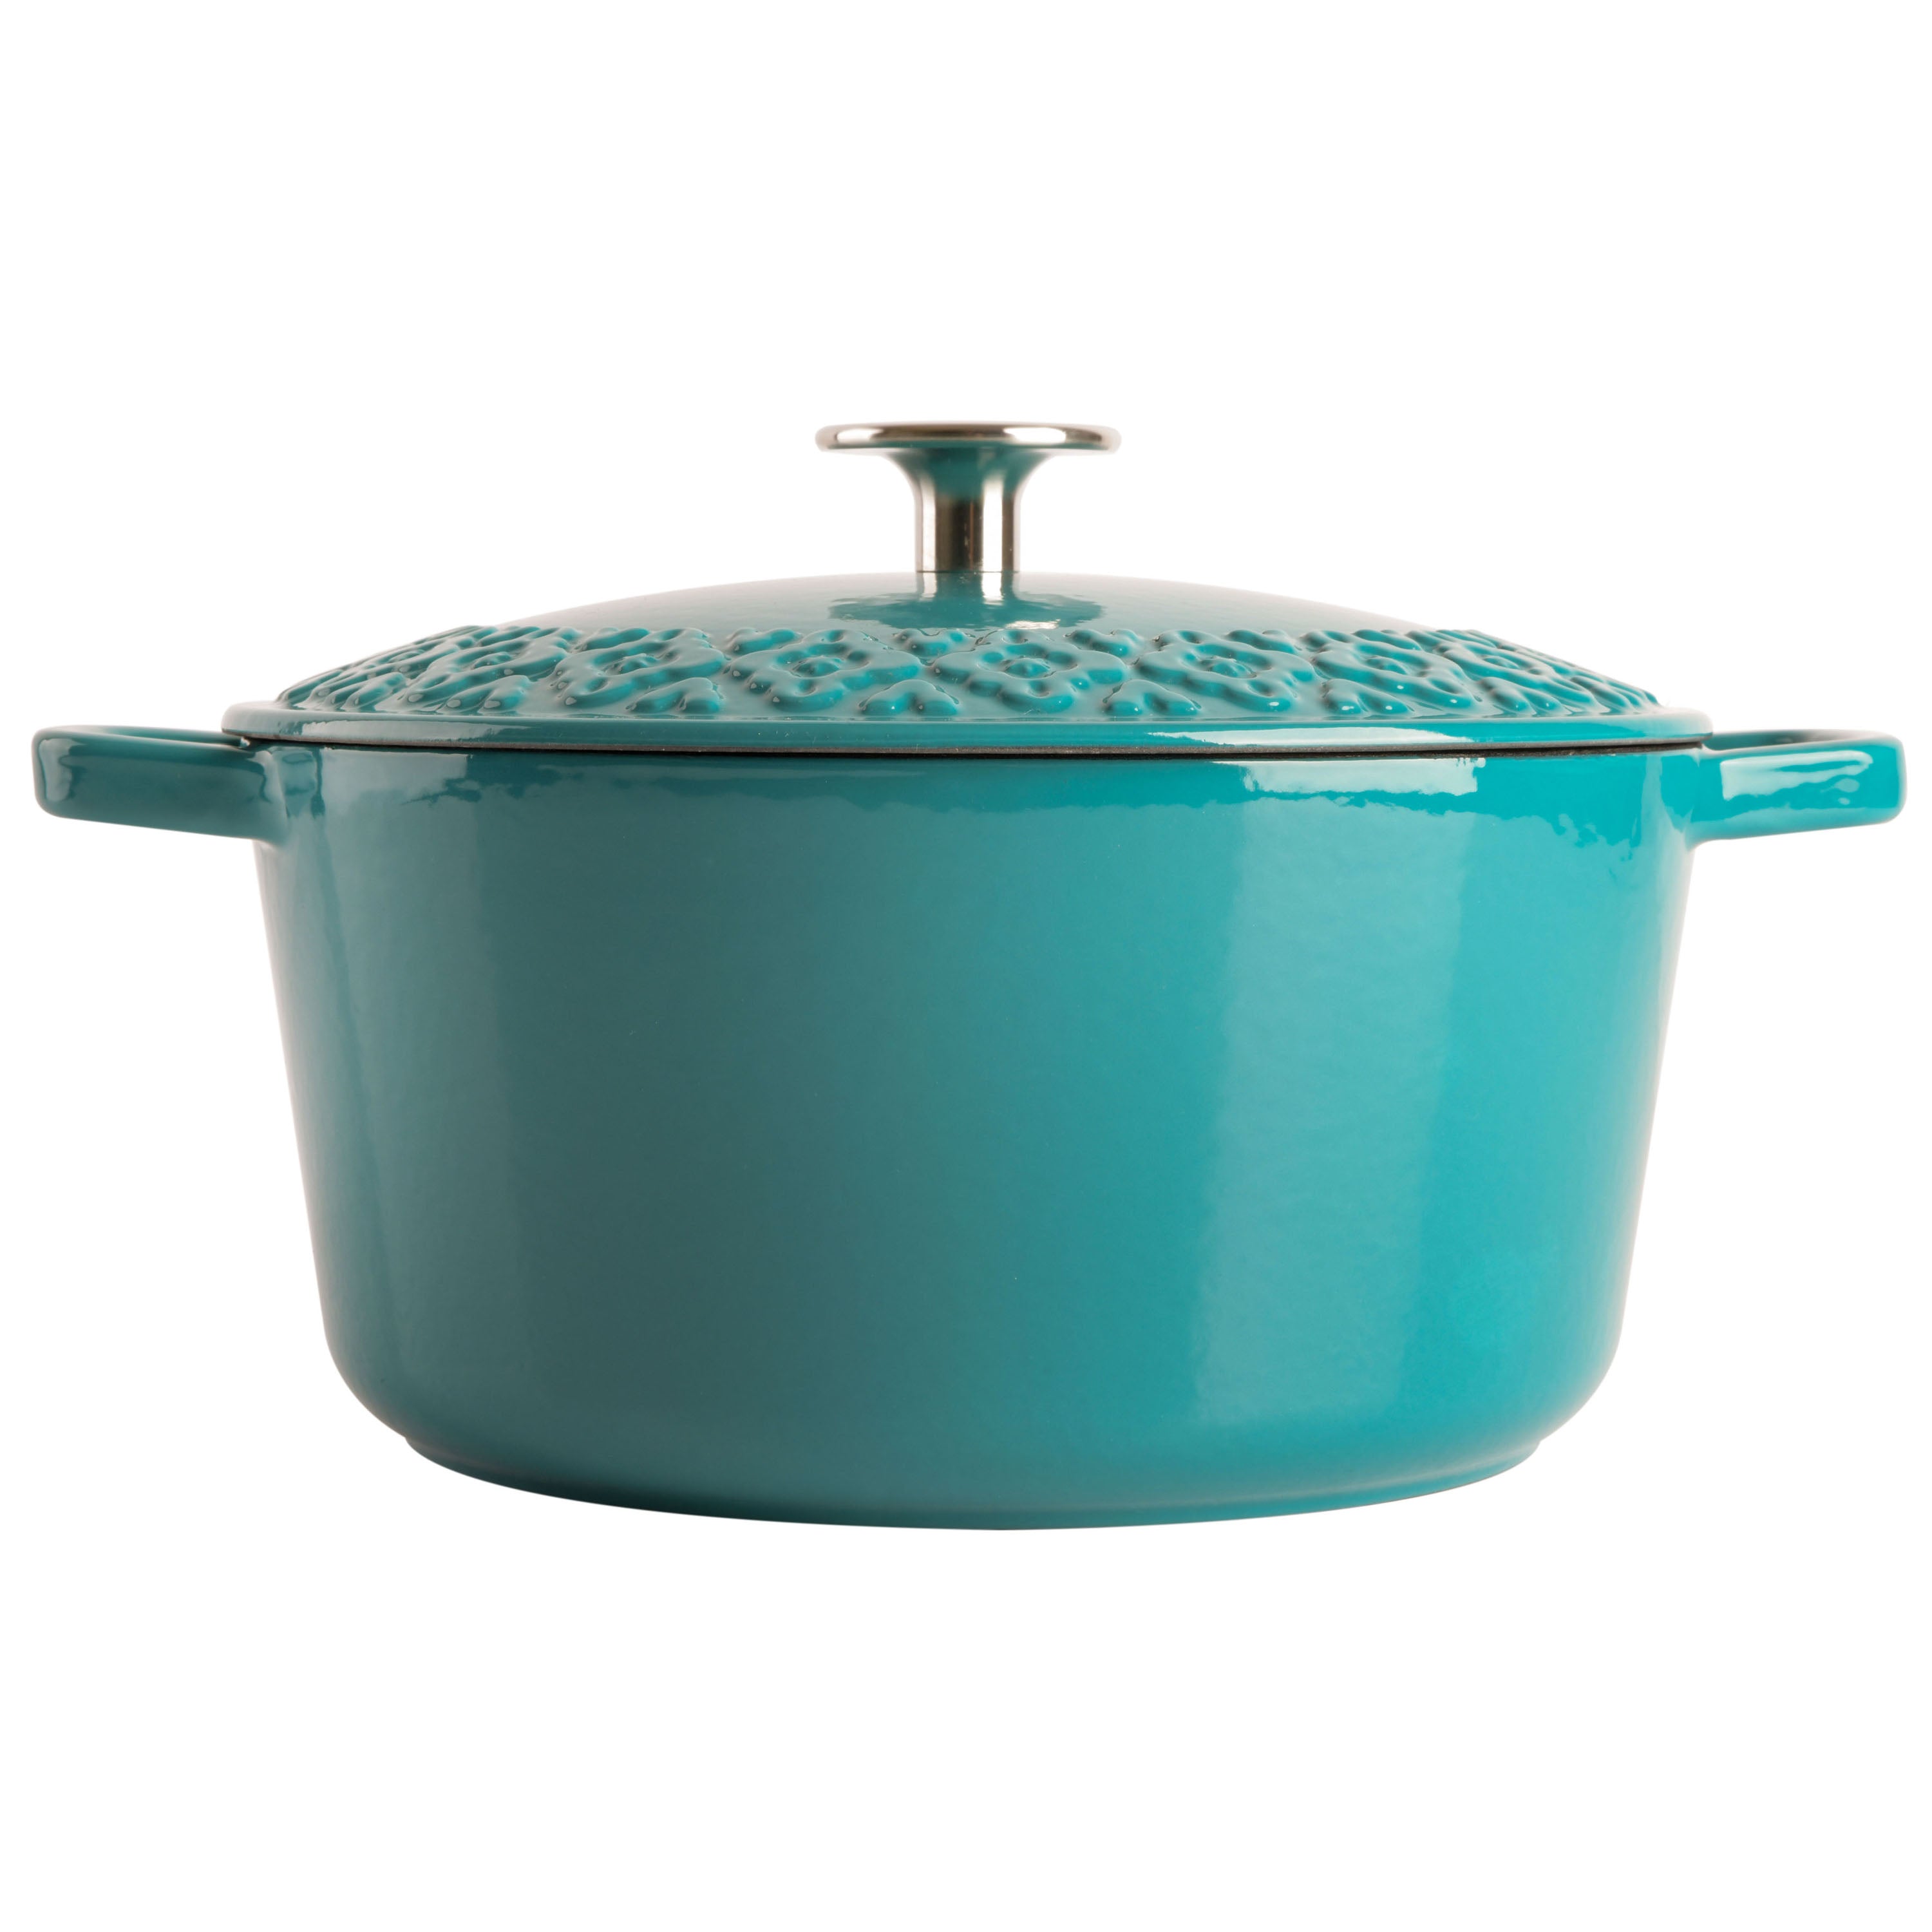 MCM Findlay 7 Enamel Cast Iron Casserole With Lid, 60s Mid Century  Turquoise MEDIUM Small Dutch Oven Lidded Pot, Mint Teal Pastel Ironware 